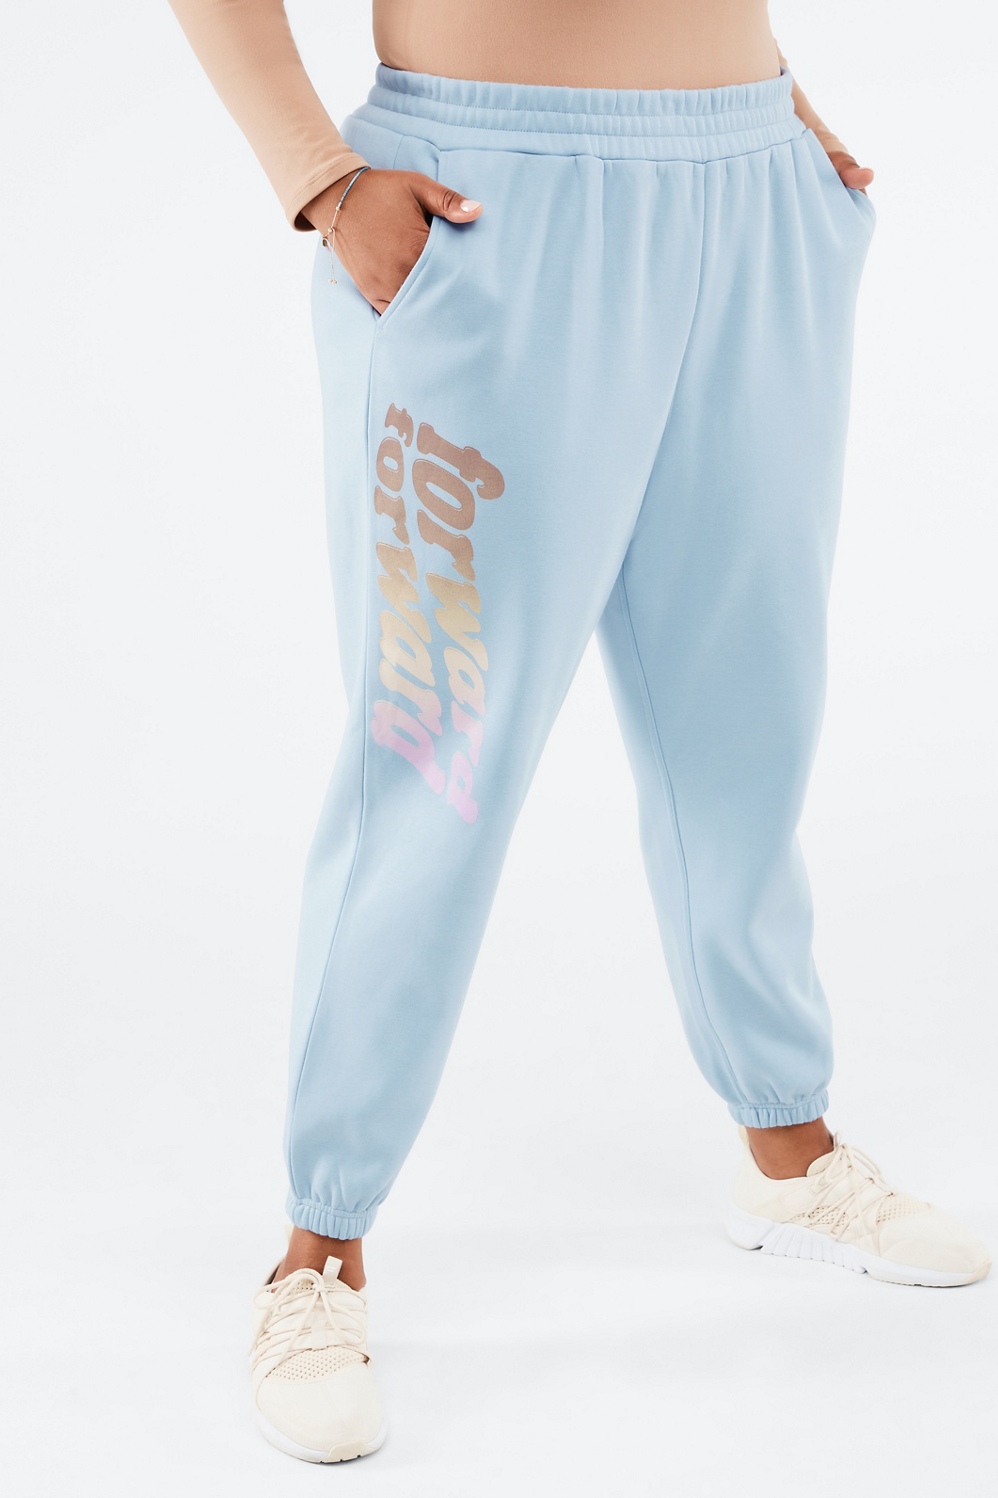 These flawless sweatpants are ideal - Tiankara_Creations